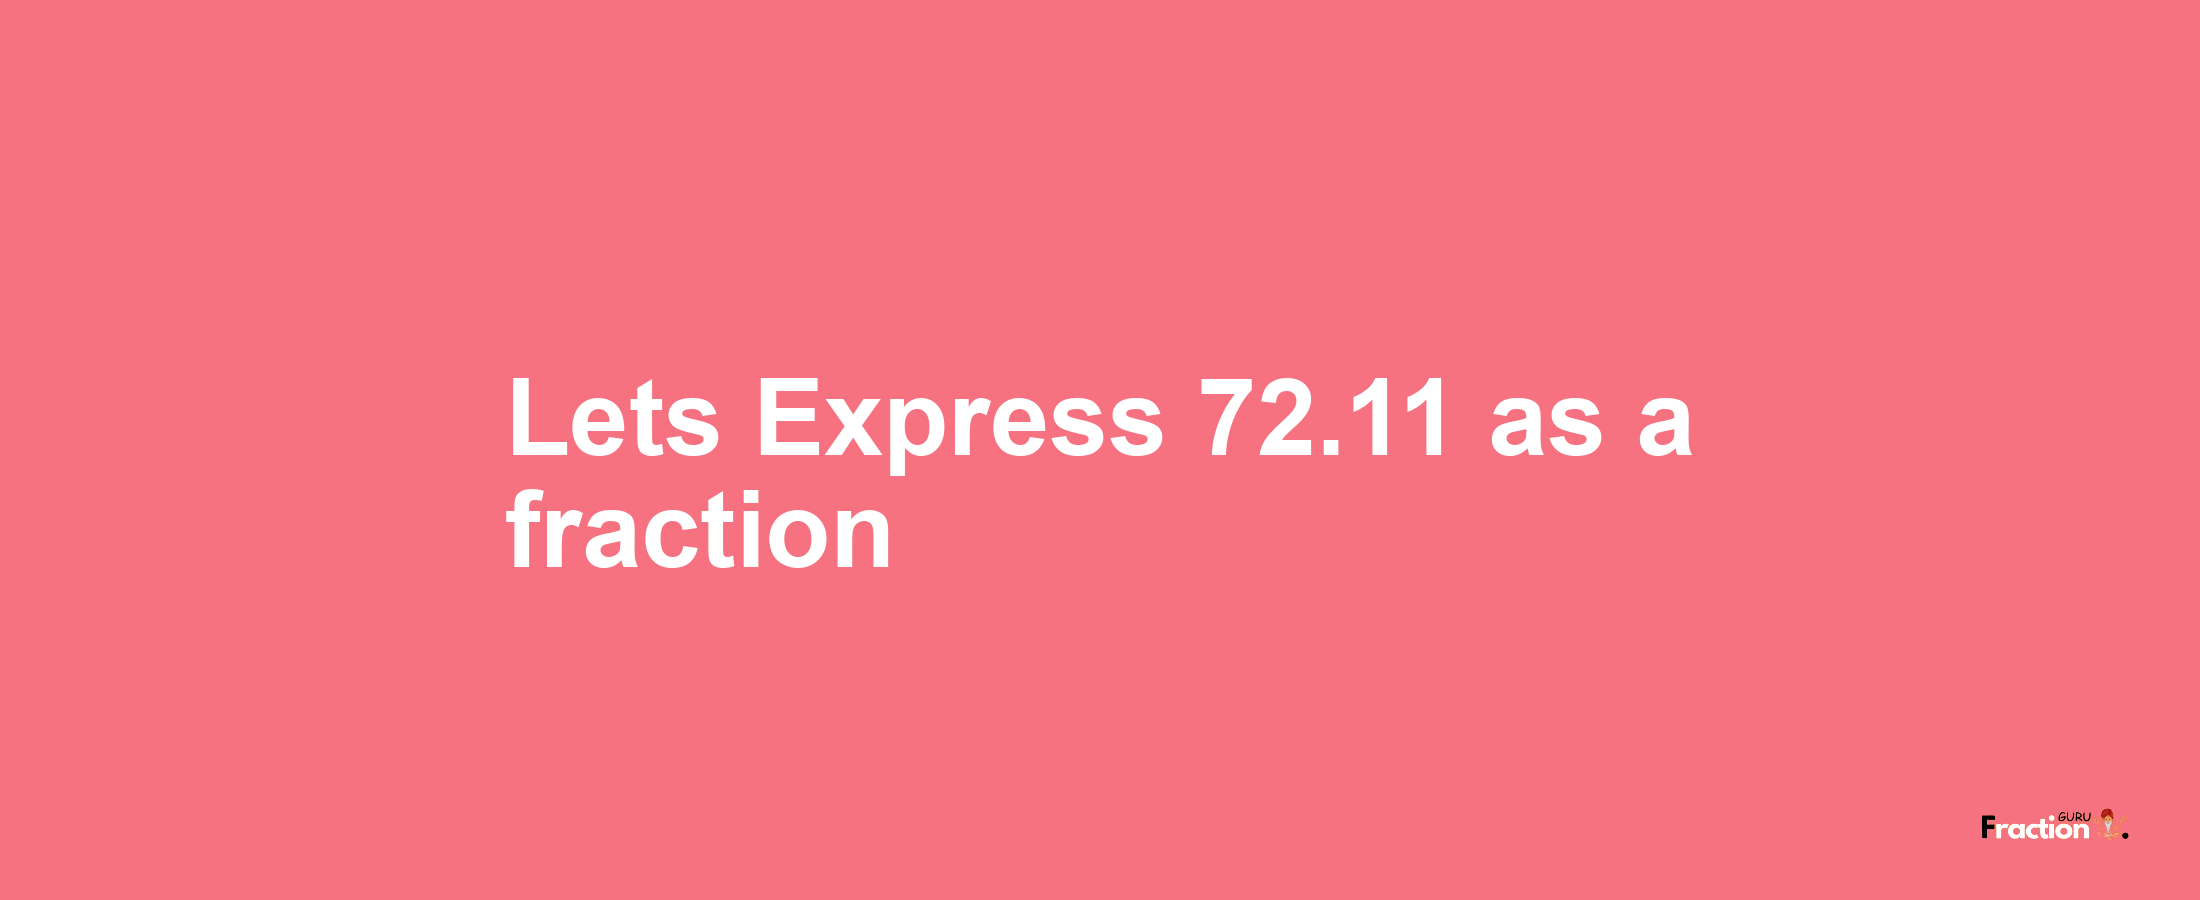 Lets Express 72.11 as afraction